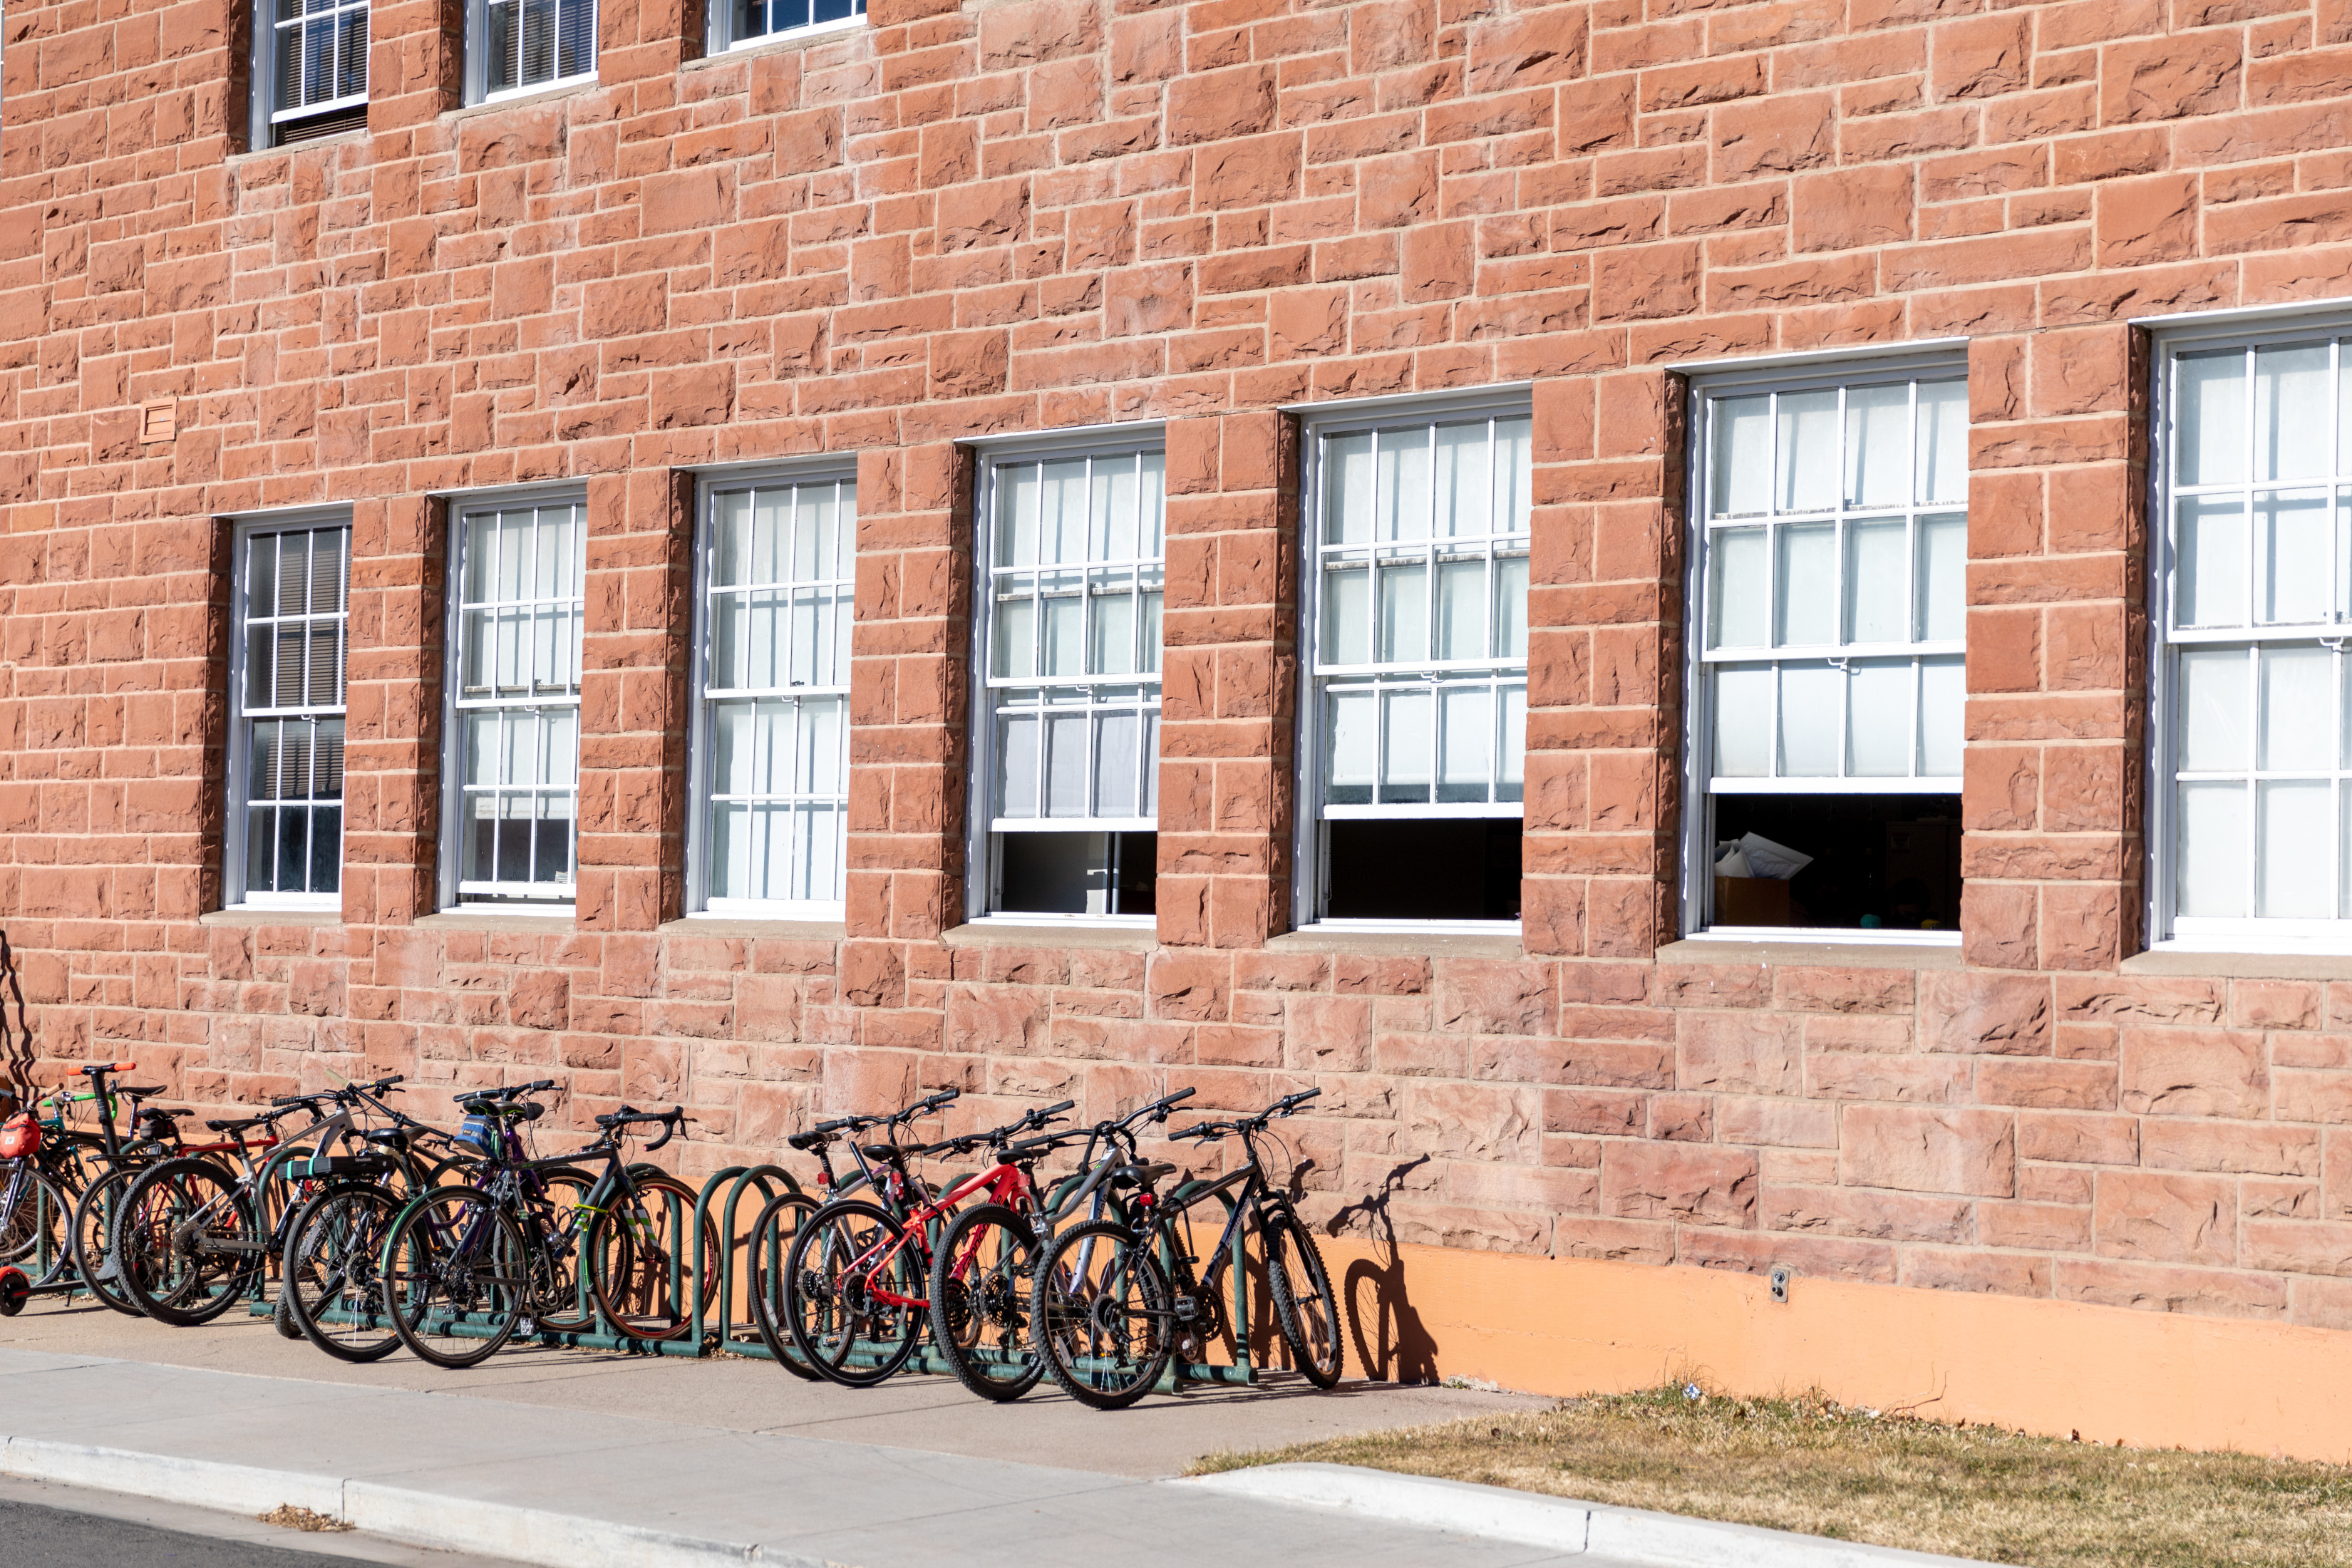 A line of bikes parked outside a brick building.